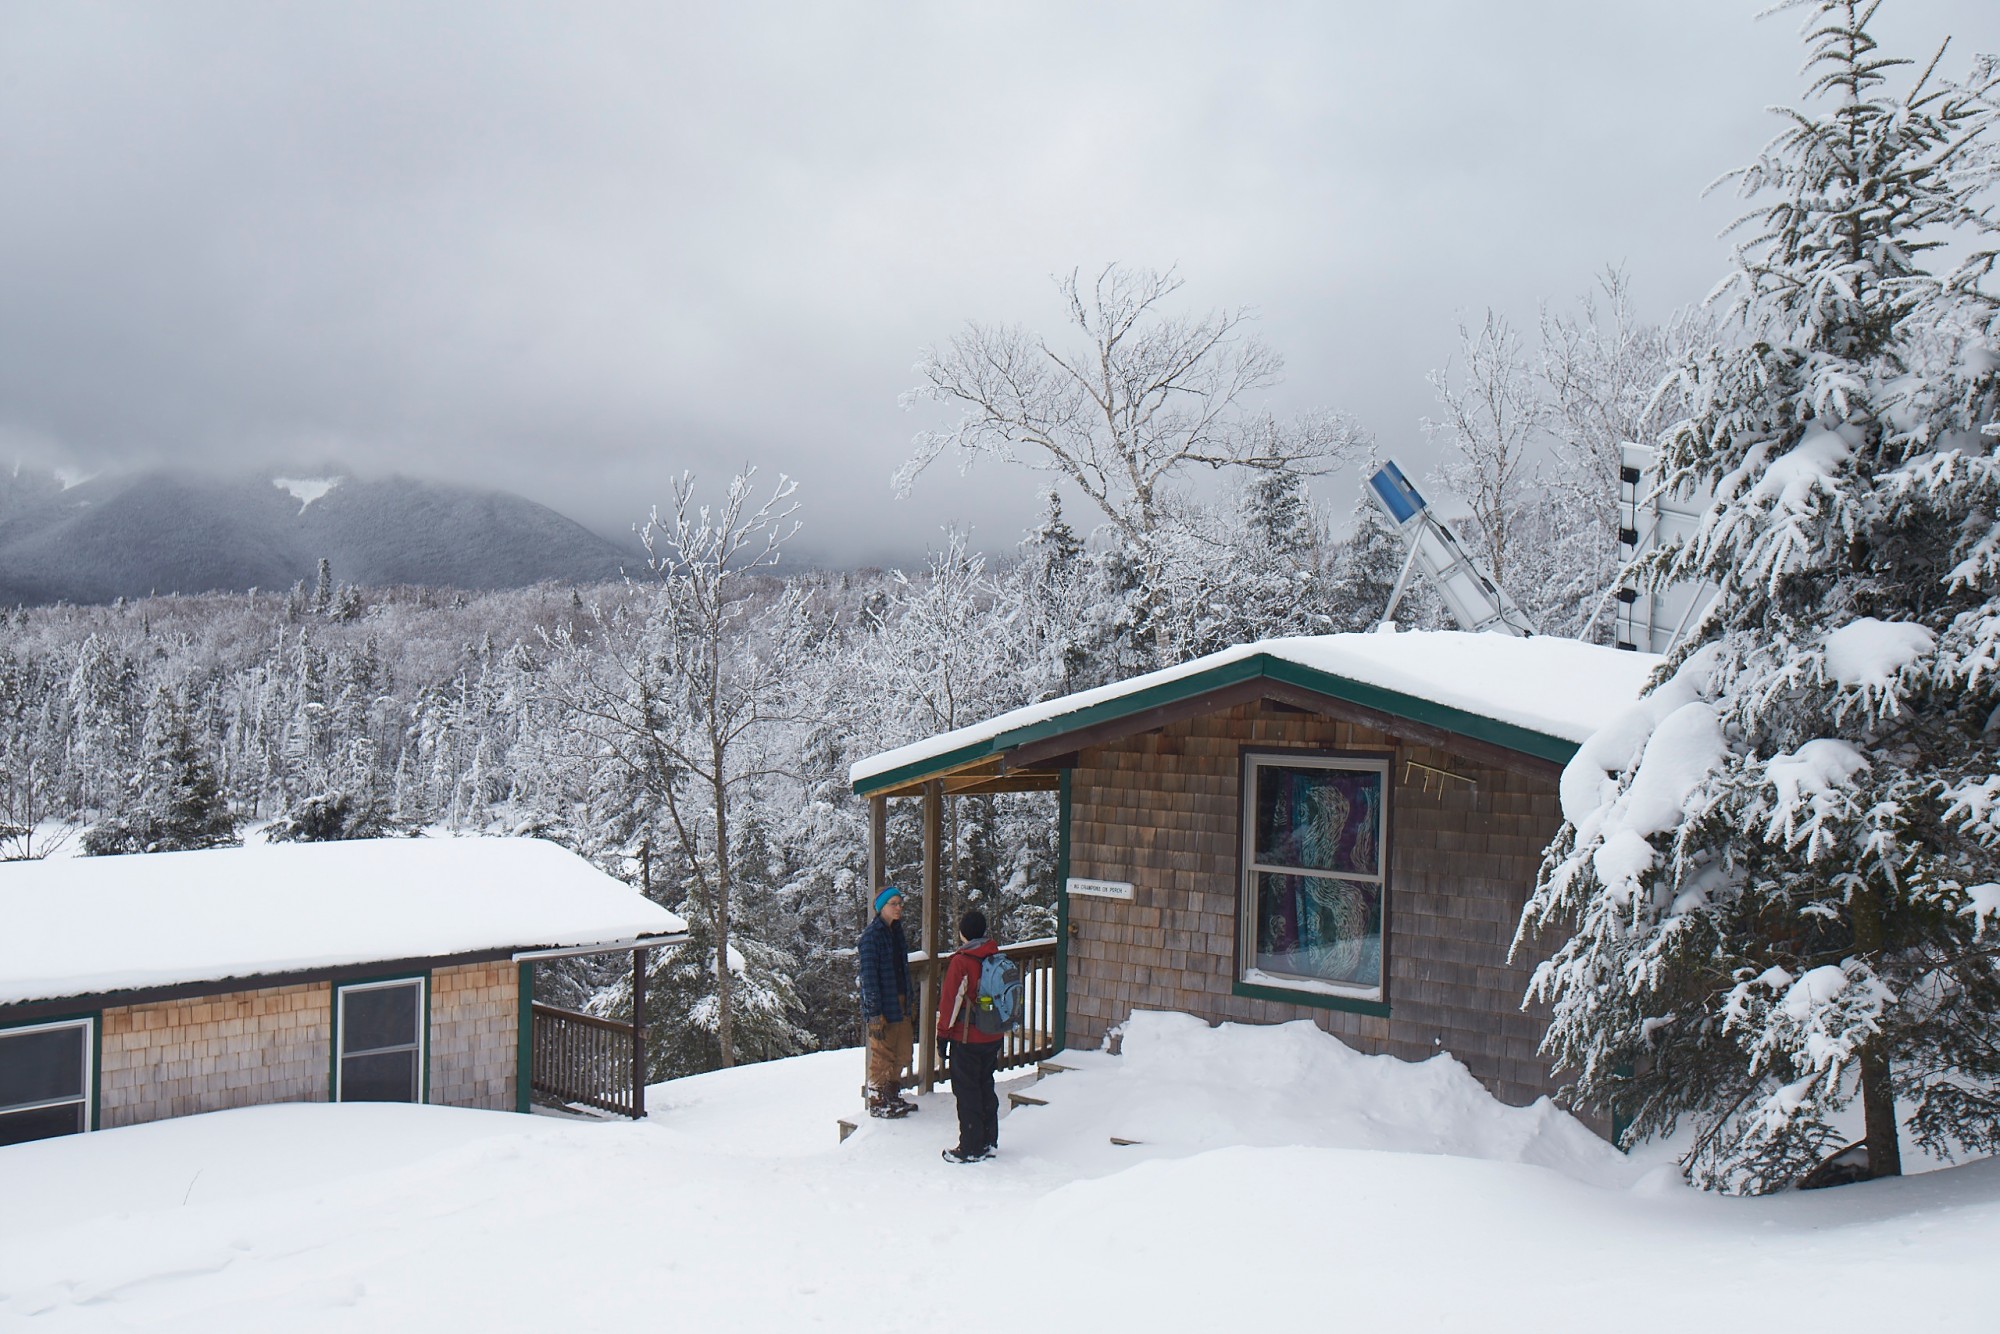 snowshoe bucket list: snow covered hut with trees in background in White Mountains